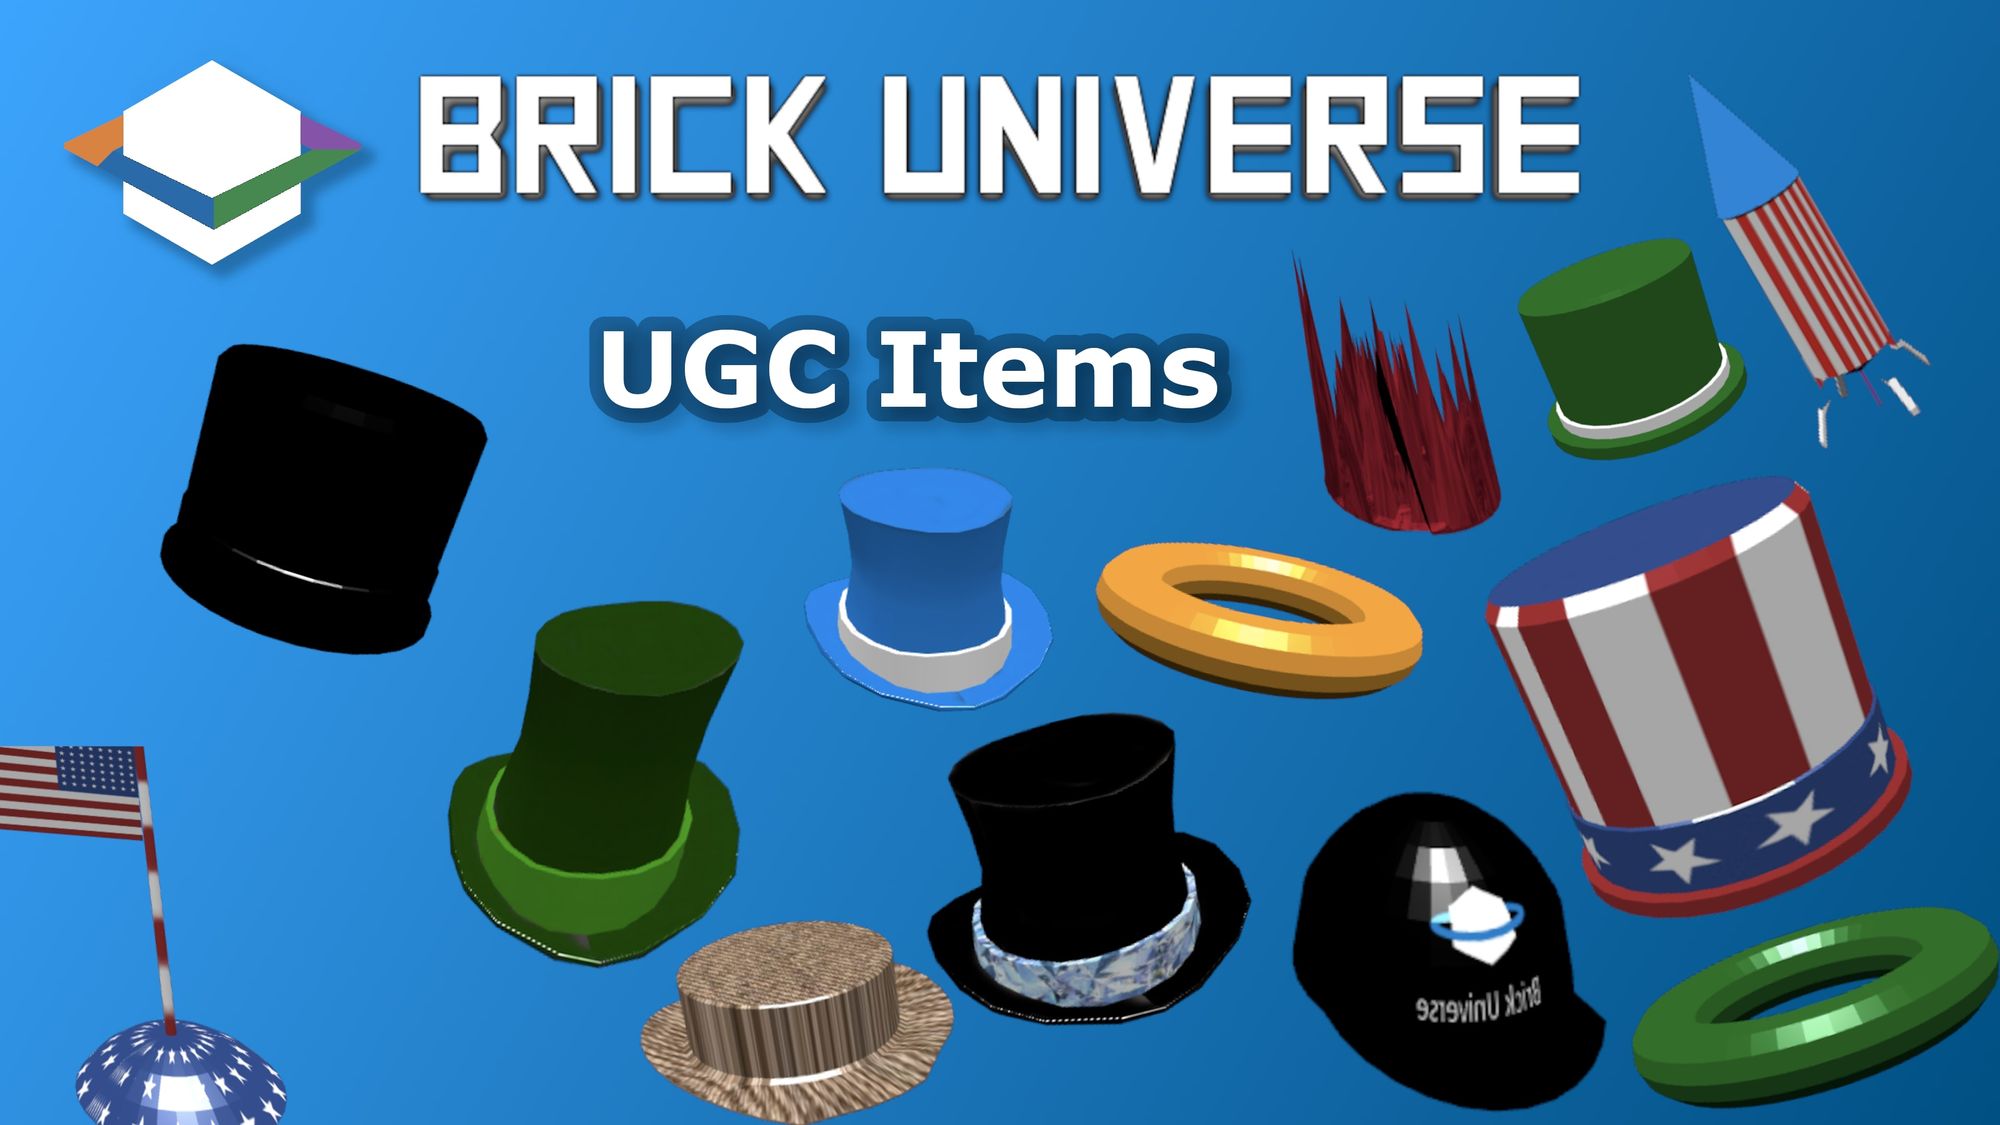 Introducing UGS Hats and Reintroducing item creations